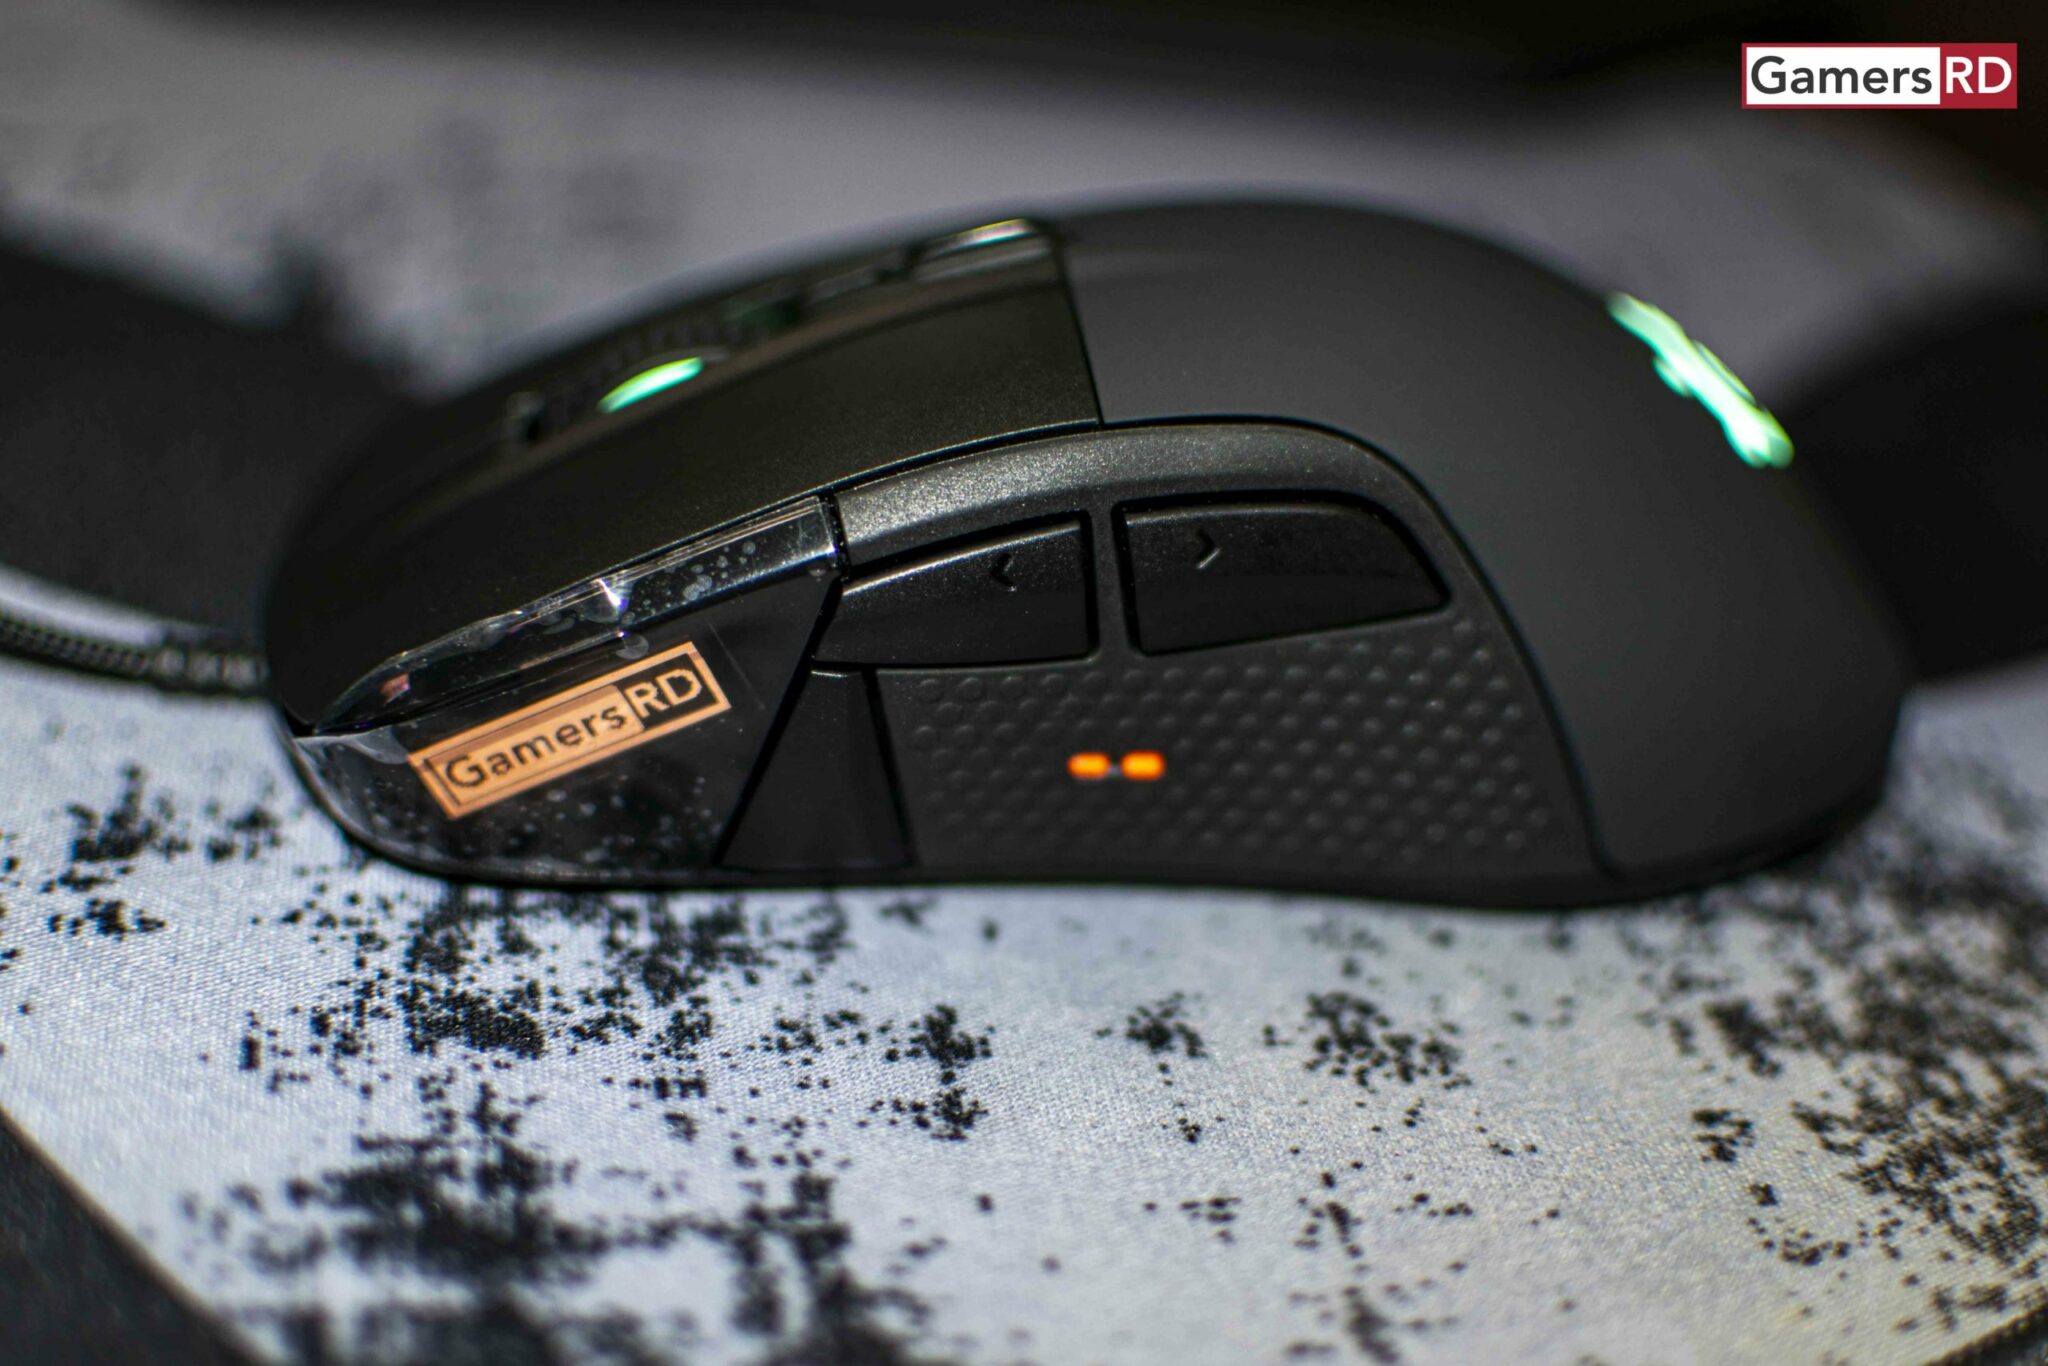 SteelSeries Rival 710 Gaming Mouse Review, 5 GamersRd